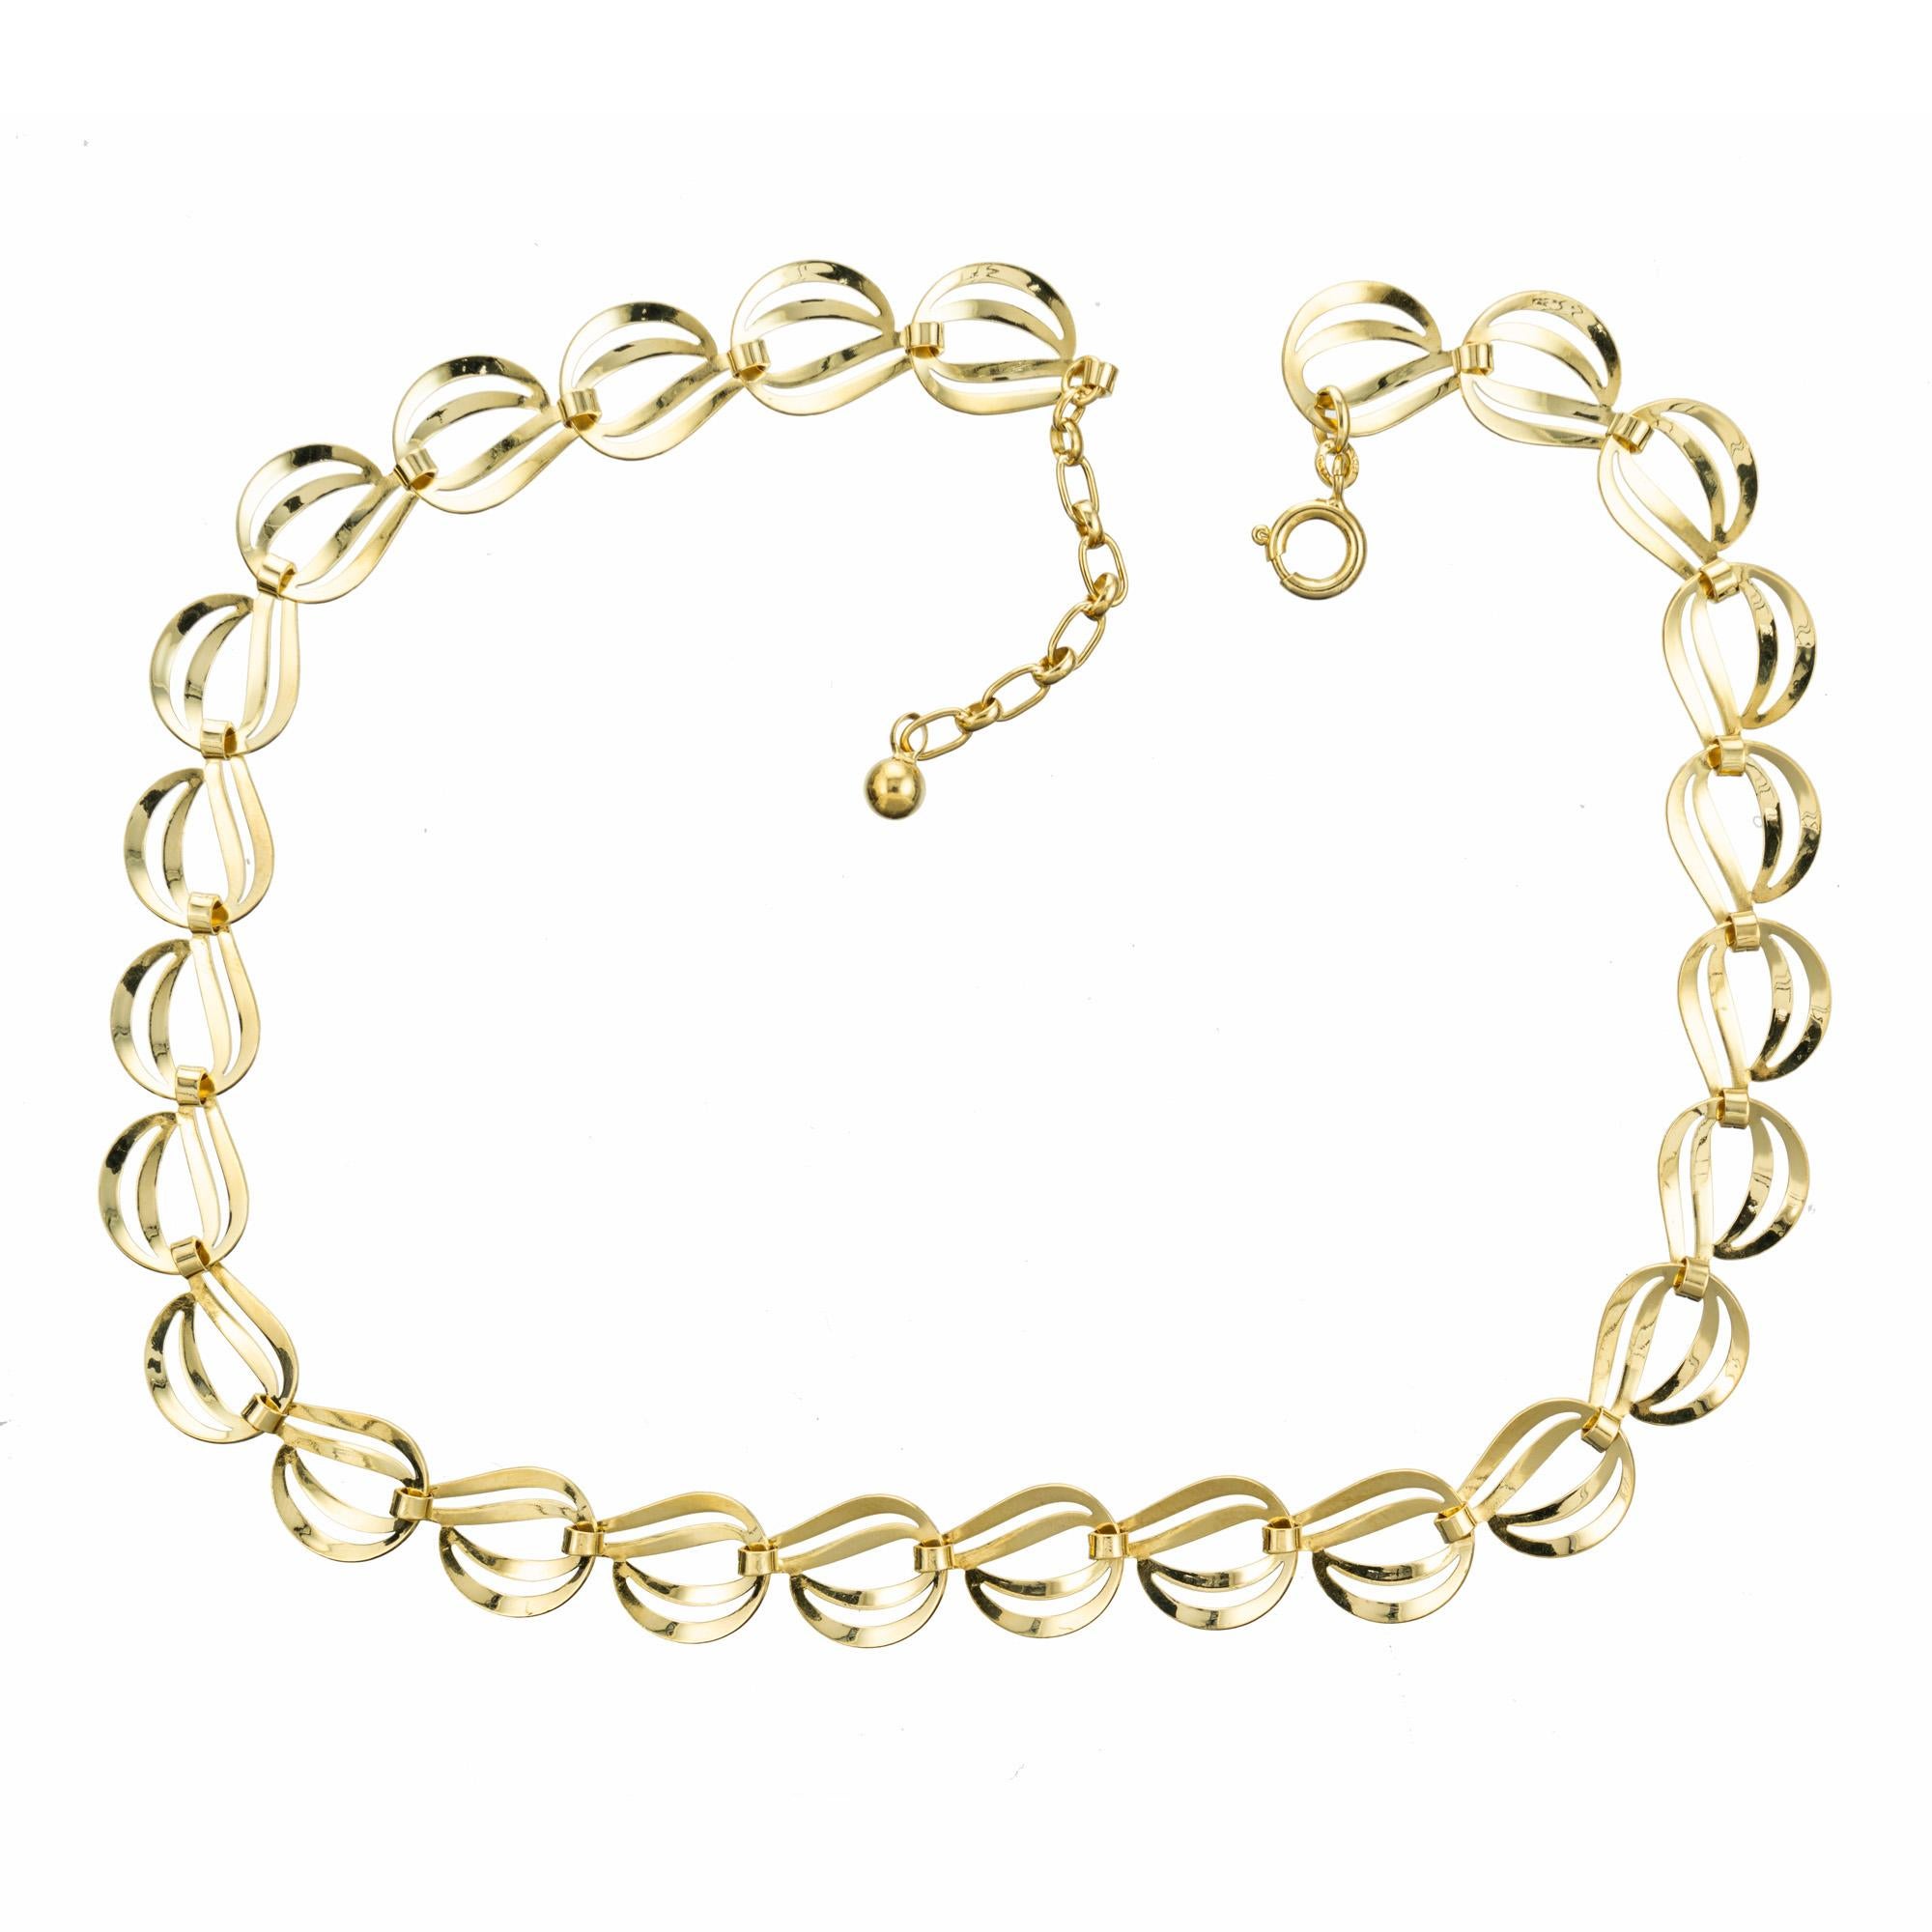 Nice open swirl design link necklace. This piece measures 15.5 Inches with an extension that makes it wearable to 17.25 Inches. Designer style swirl link necklace exudes elegance and sophistication. This exquisite piece features a double link design